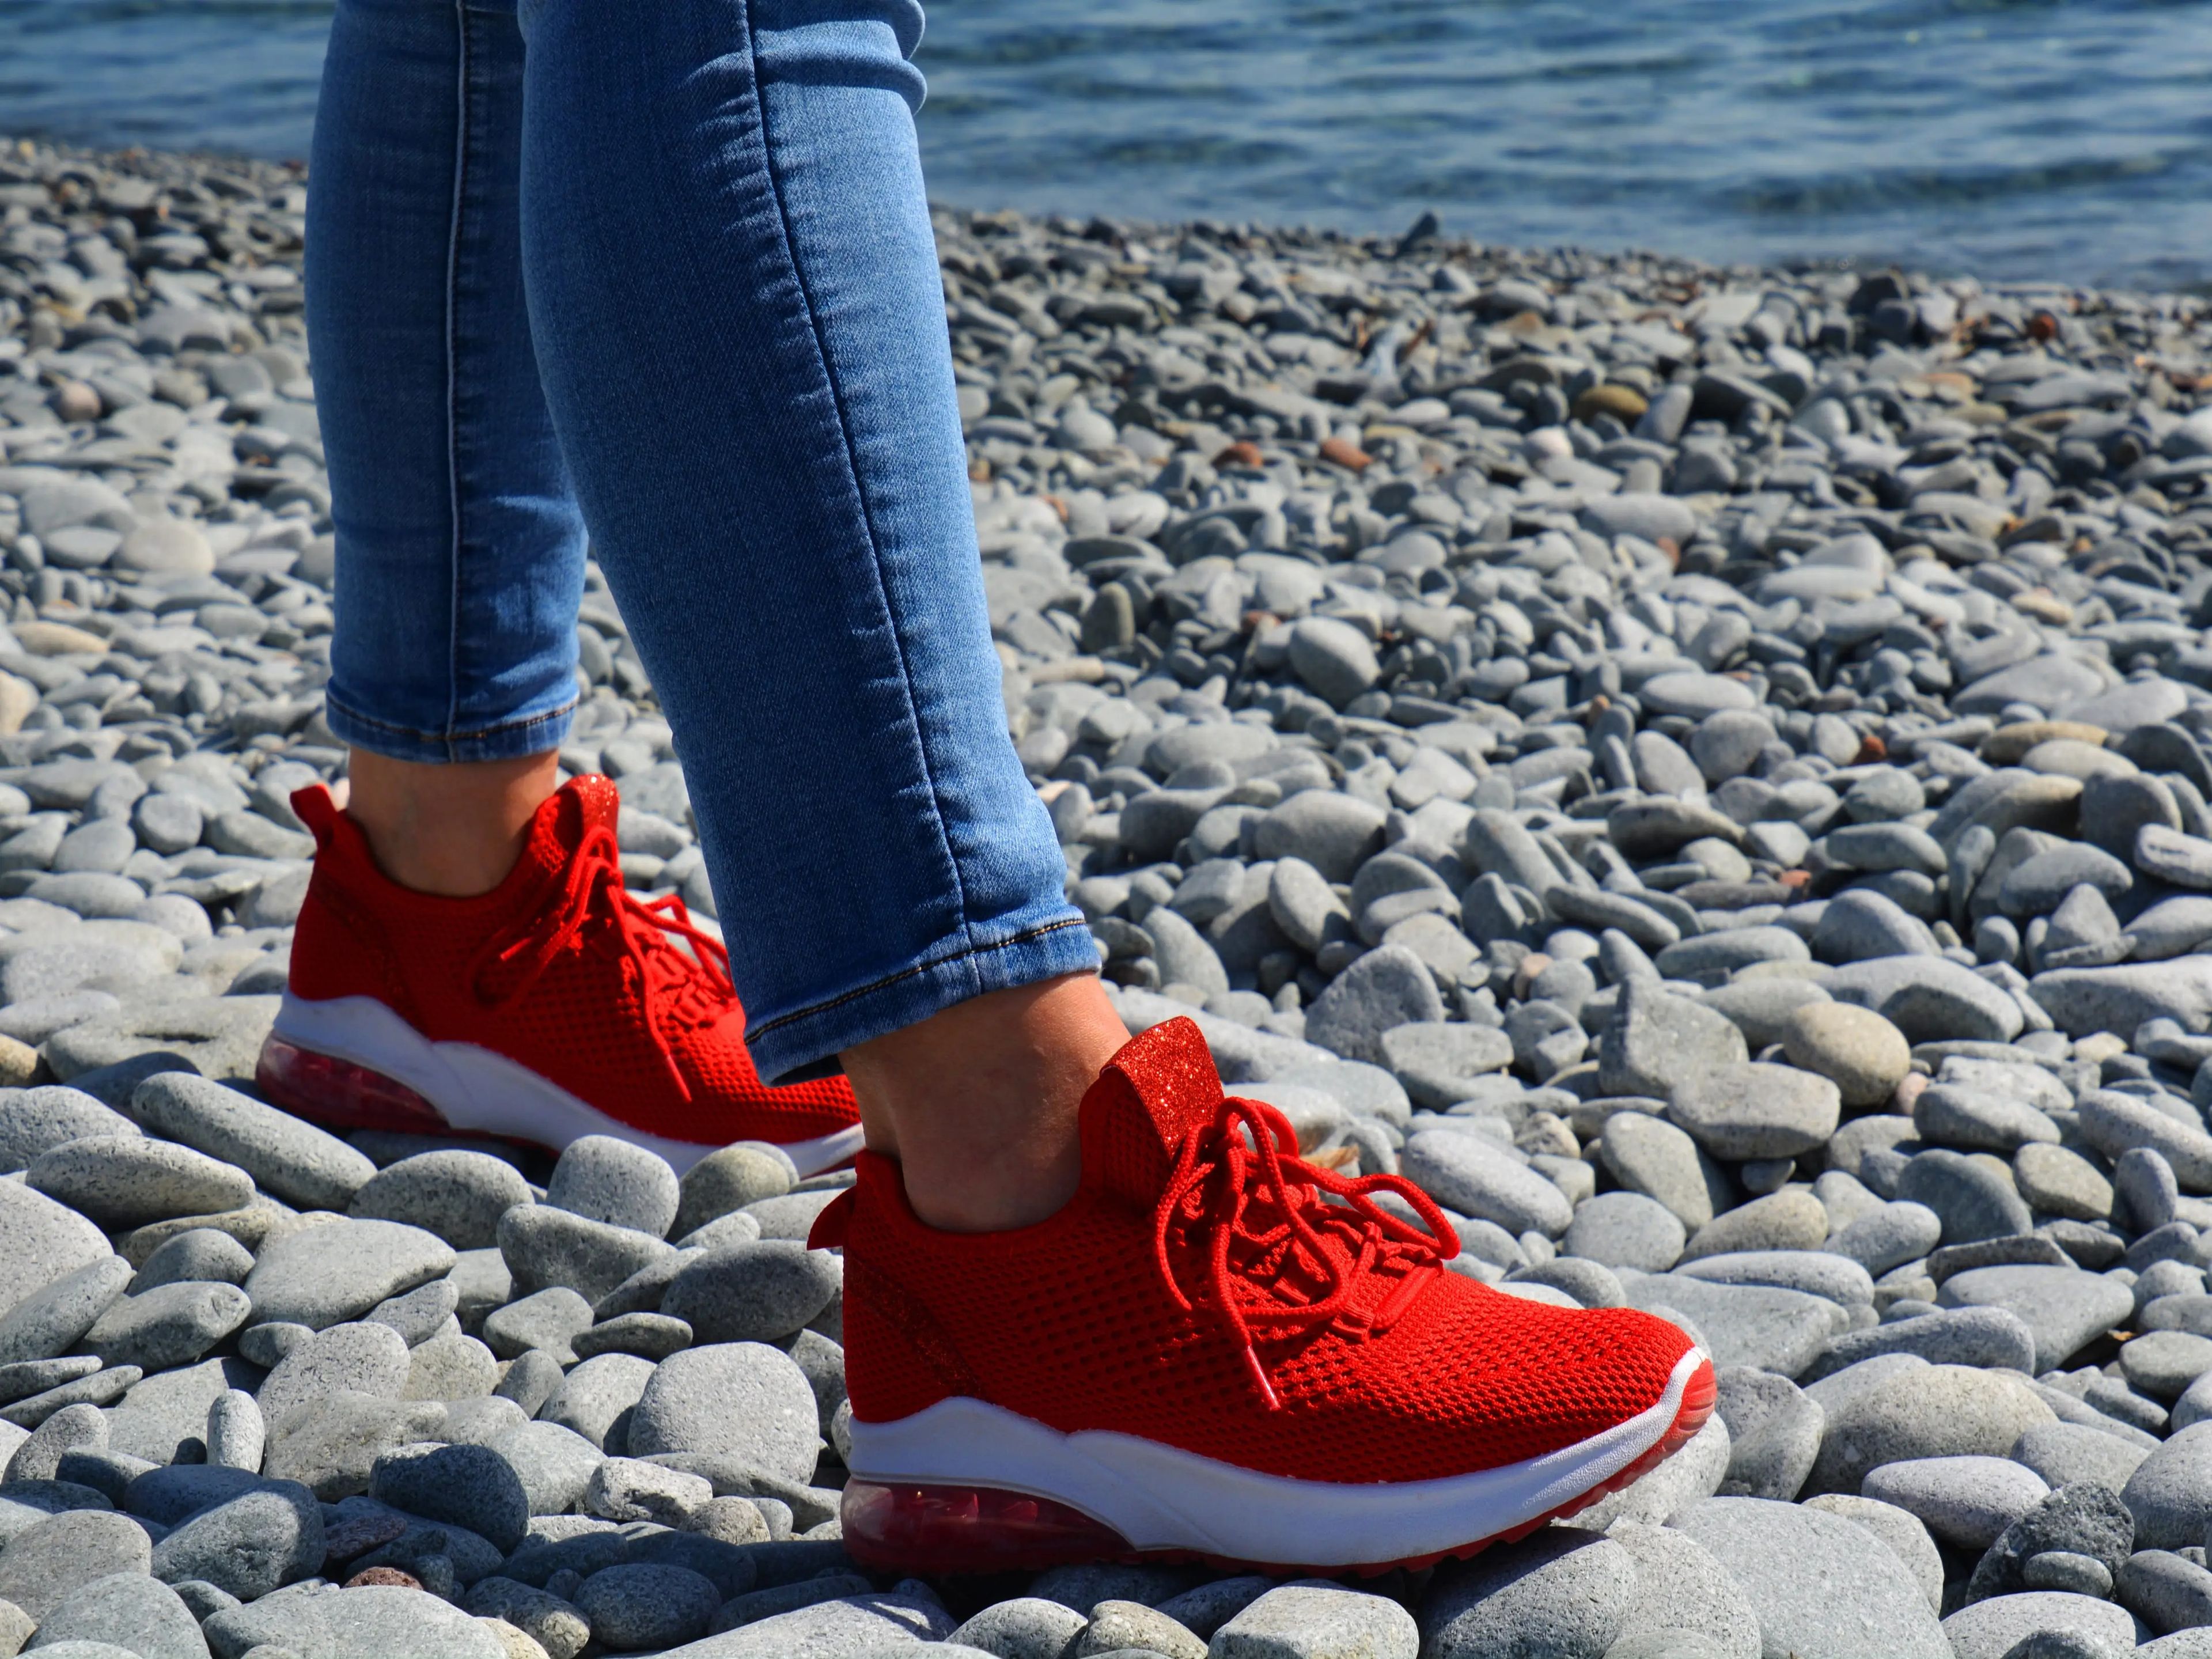 Woman wearing jeans and red sneakers on rocky beach